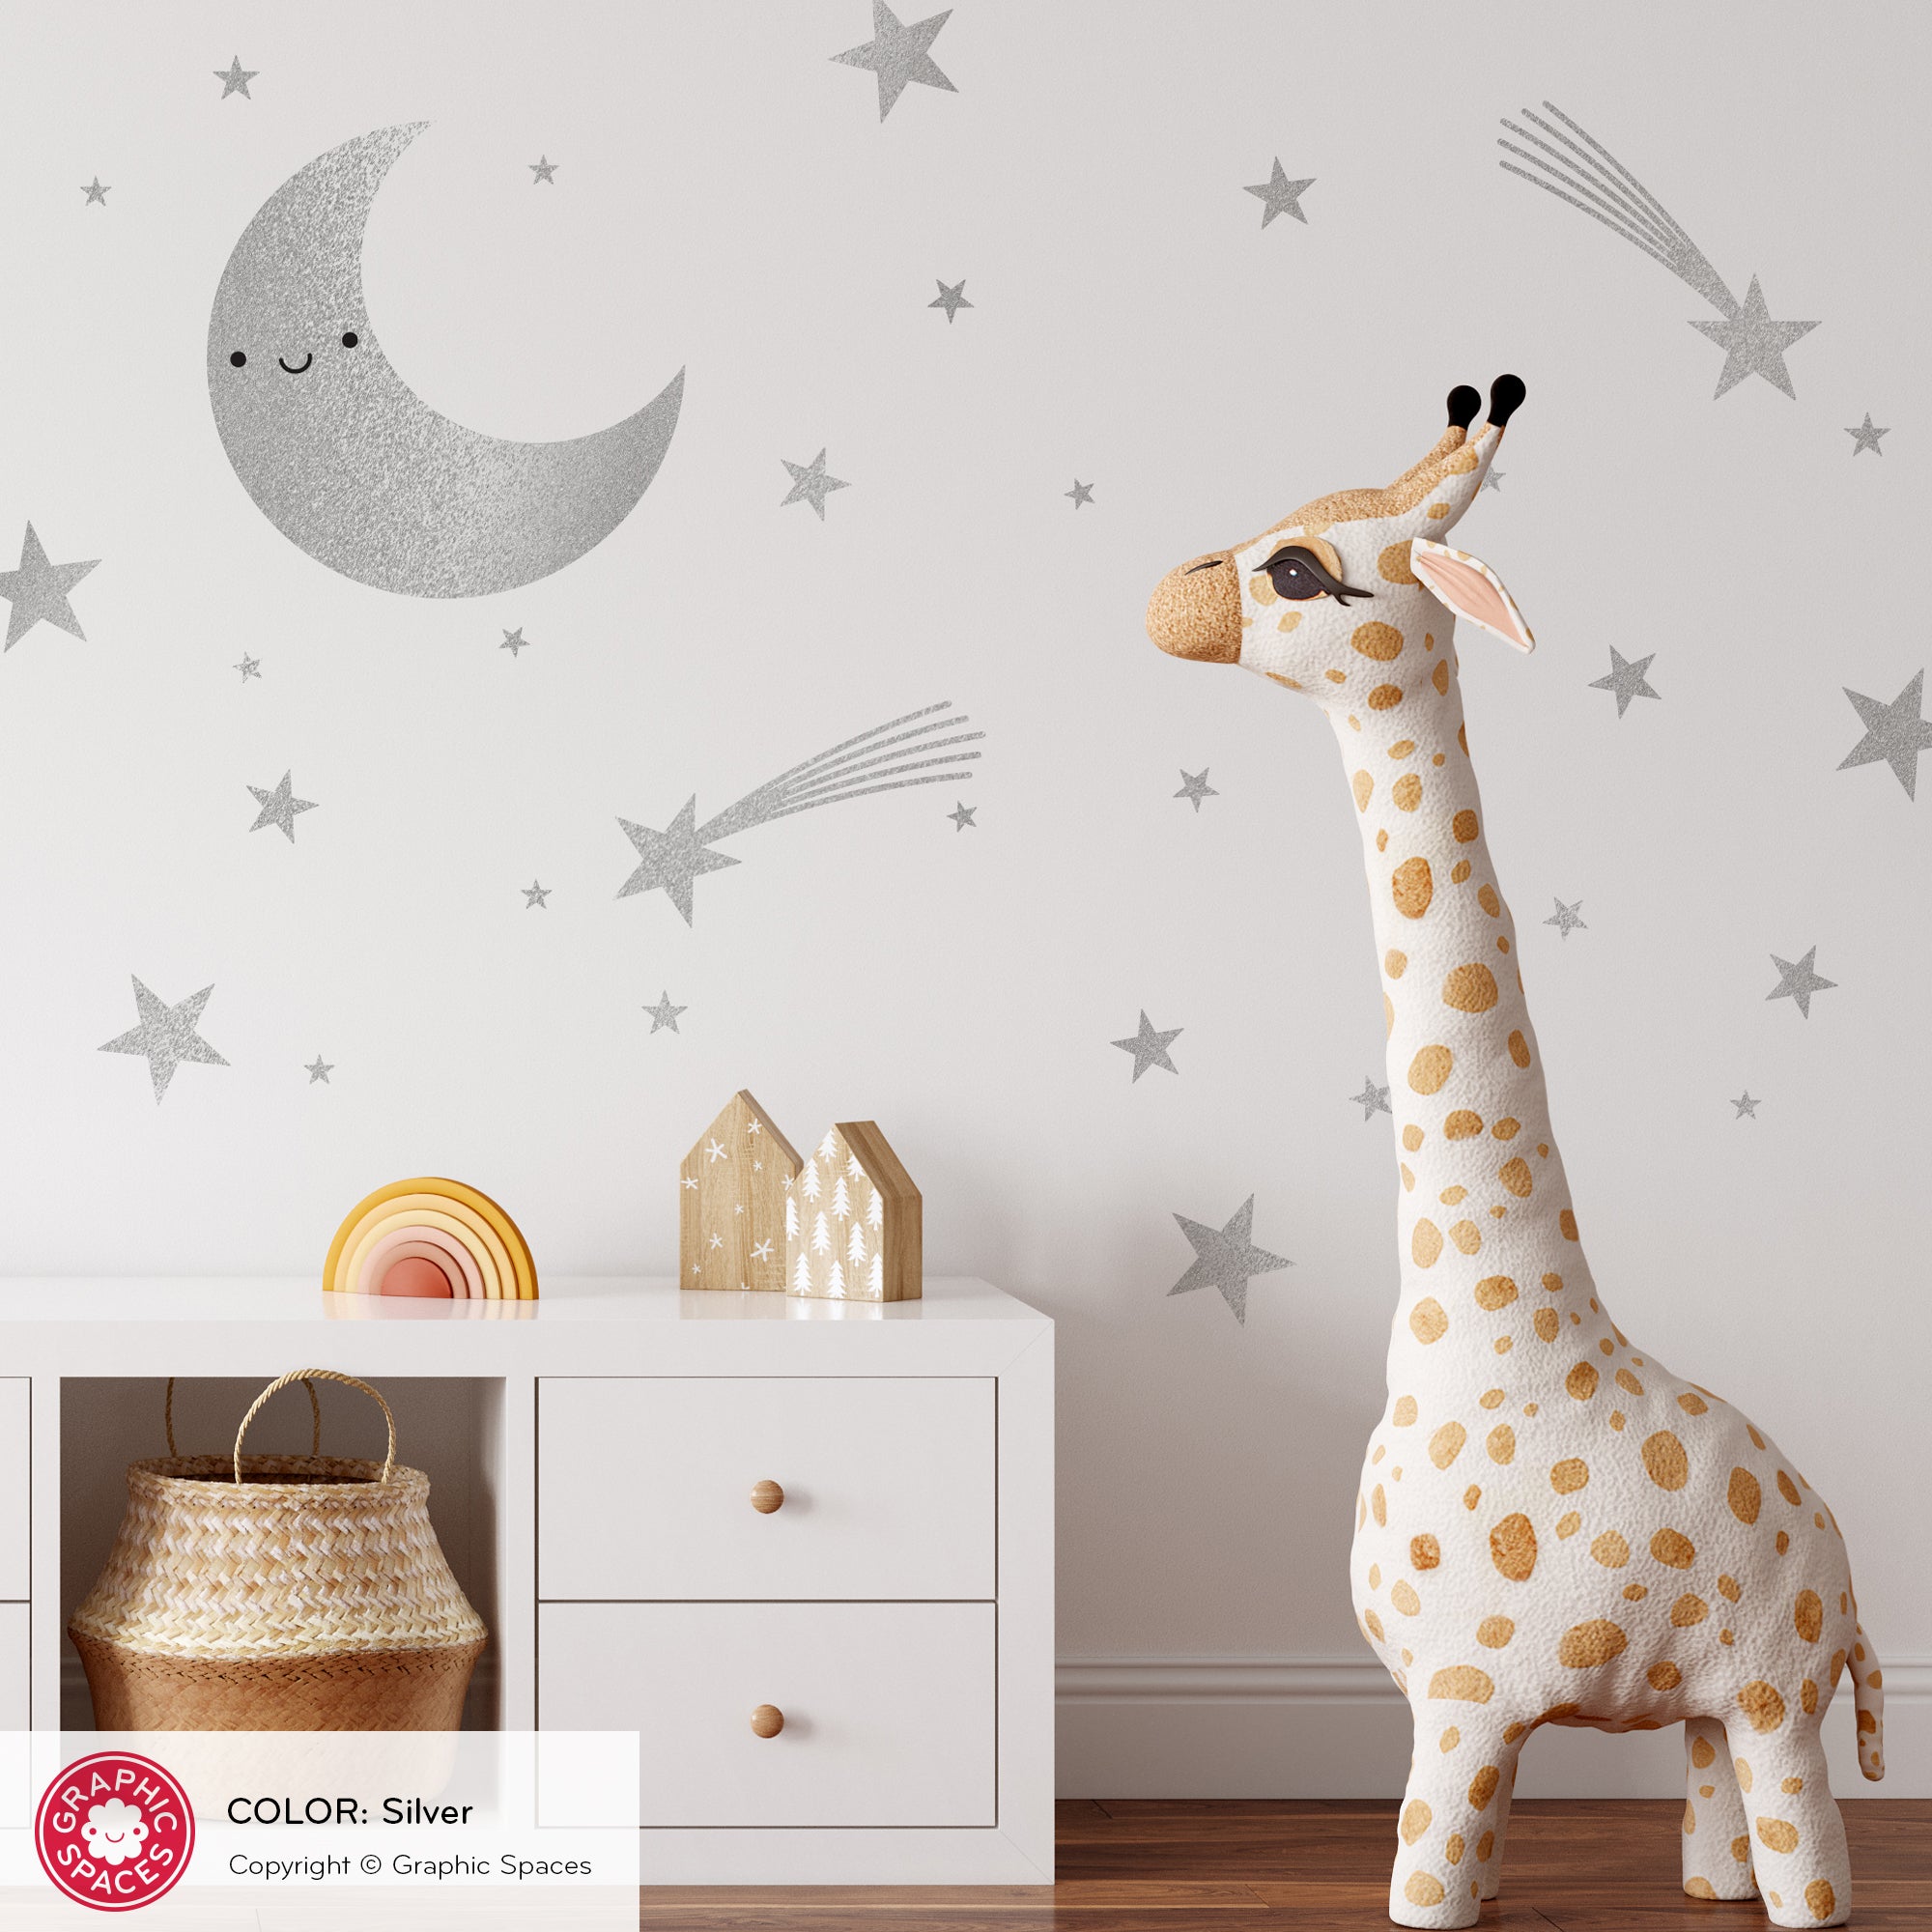 Counting Sheep Wall Decal Nursery Moon Fabric Stickers Watercolor Wall Art  Yellow Star Decals Toodlesdecalstudio 